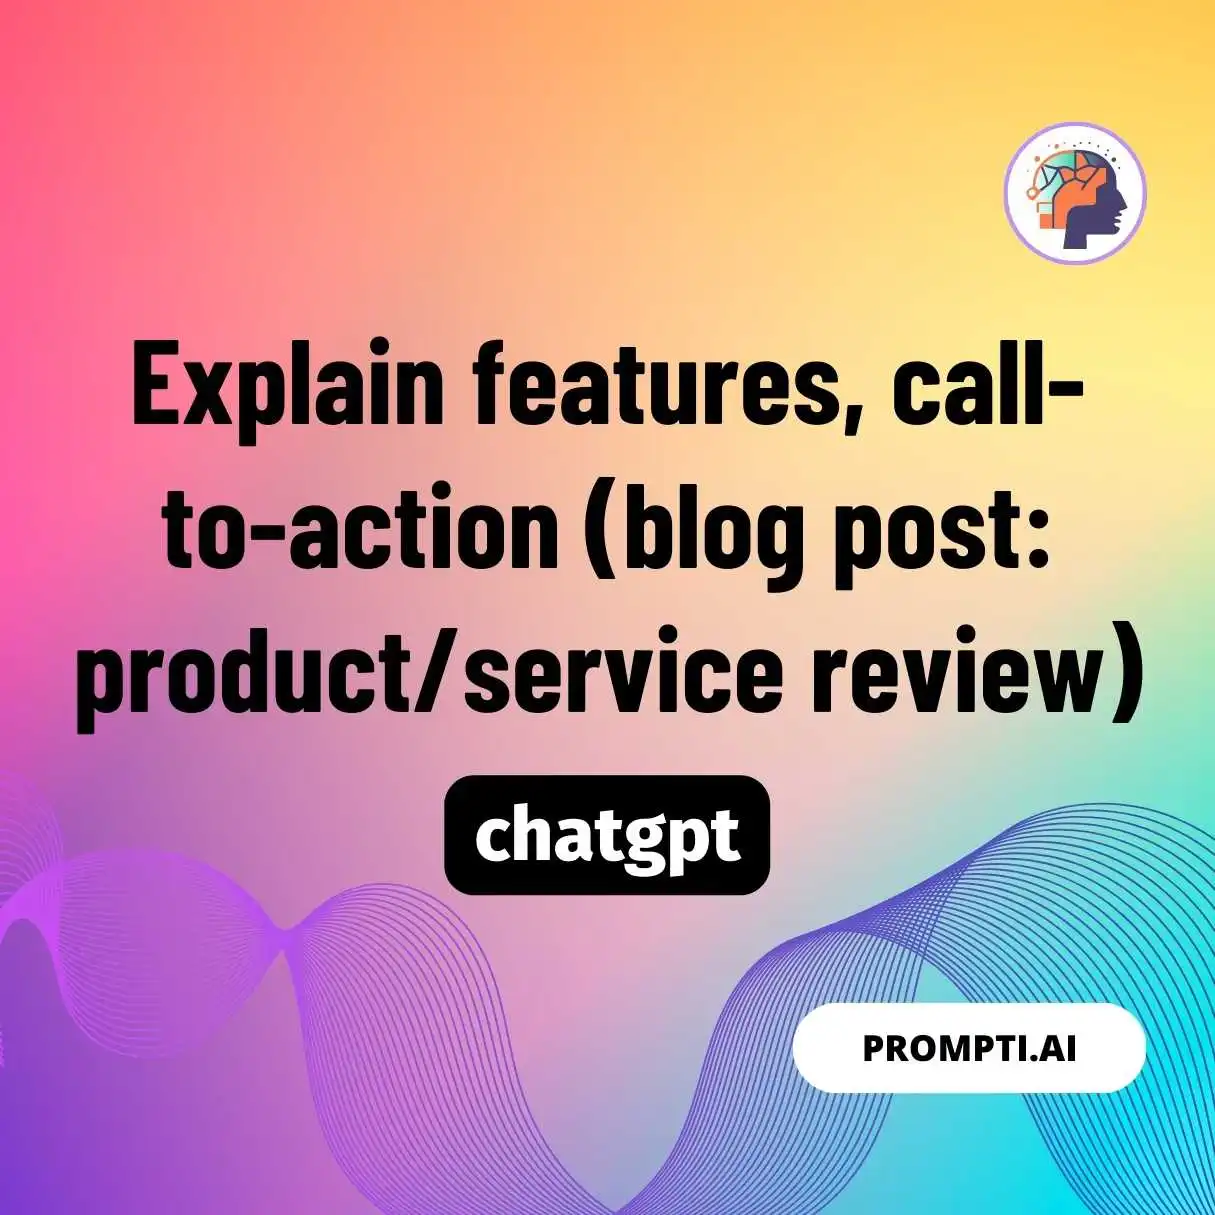 Explain features, call-to-action (blog post: product/service review)